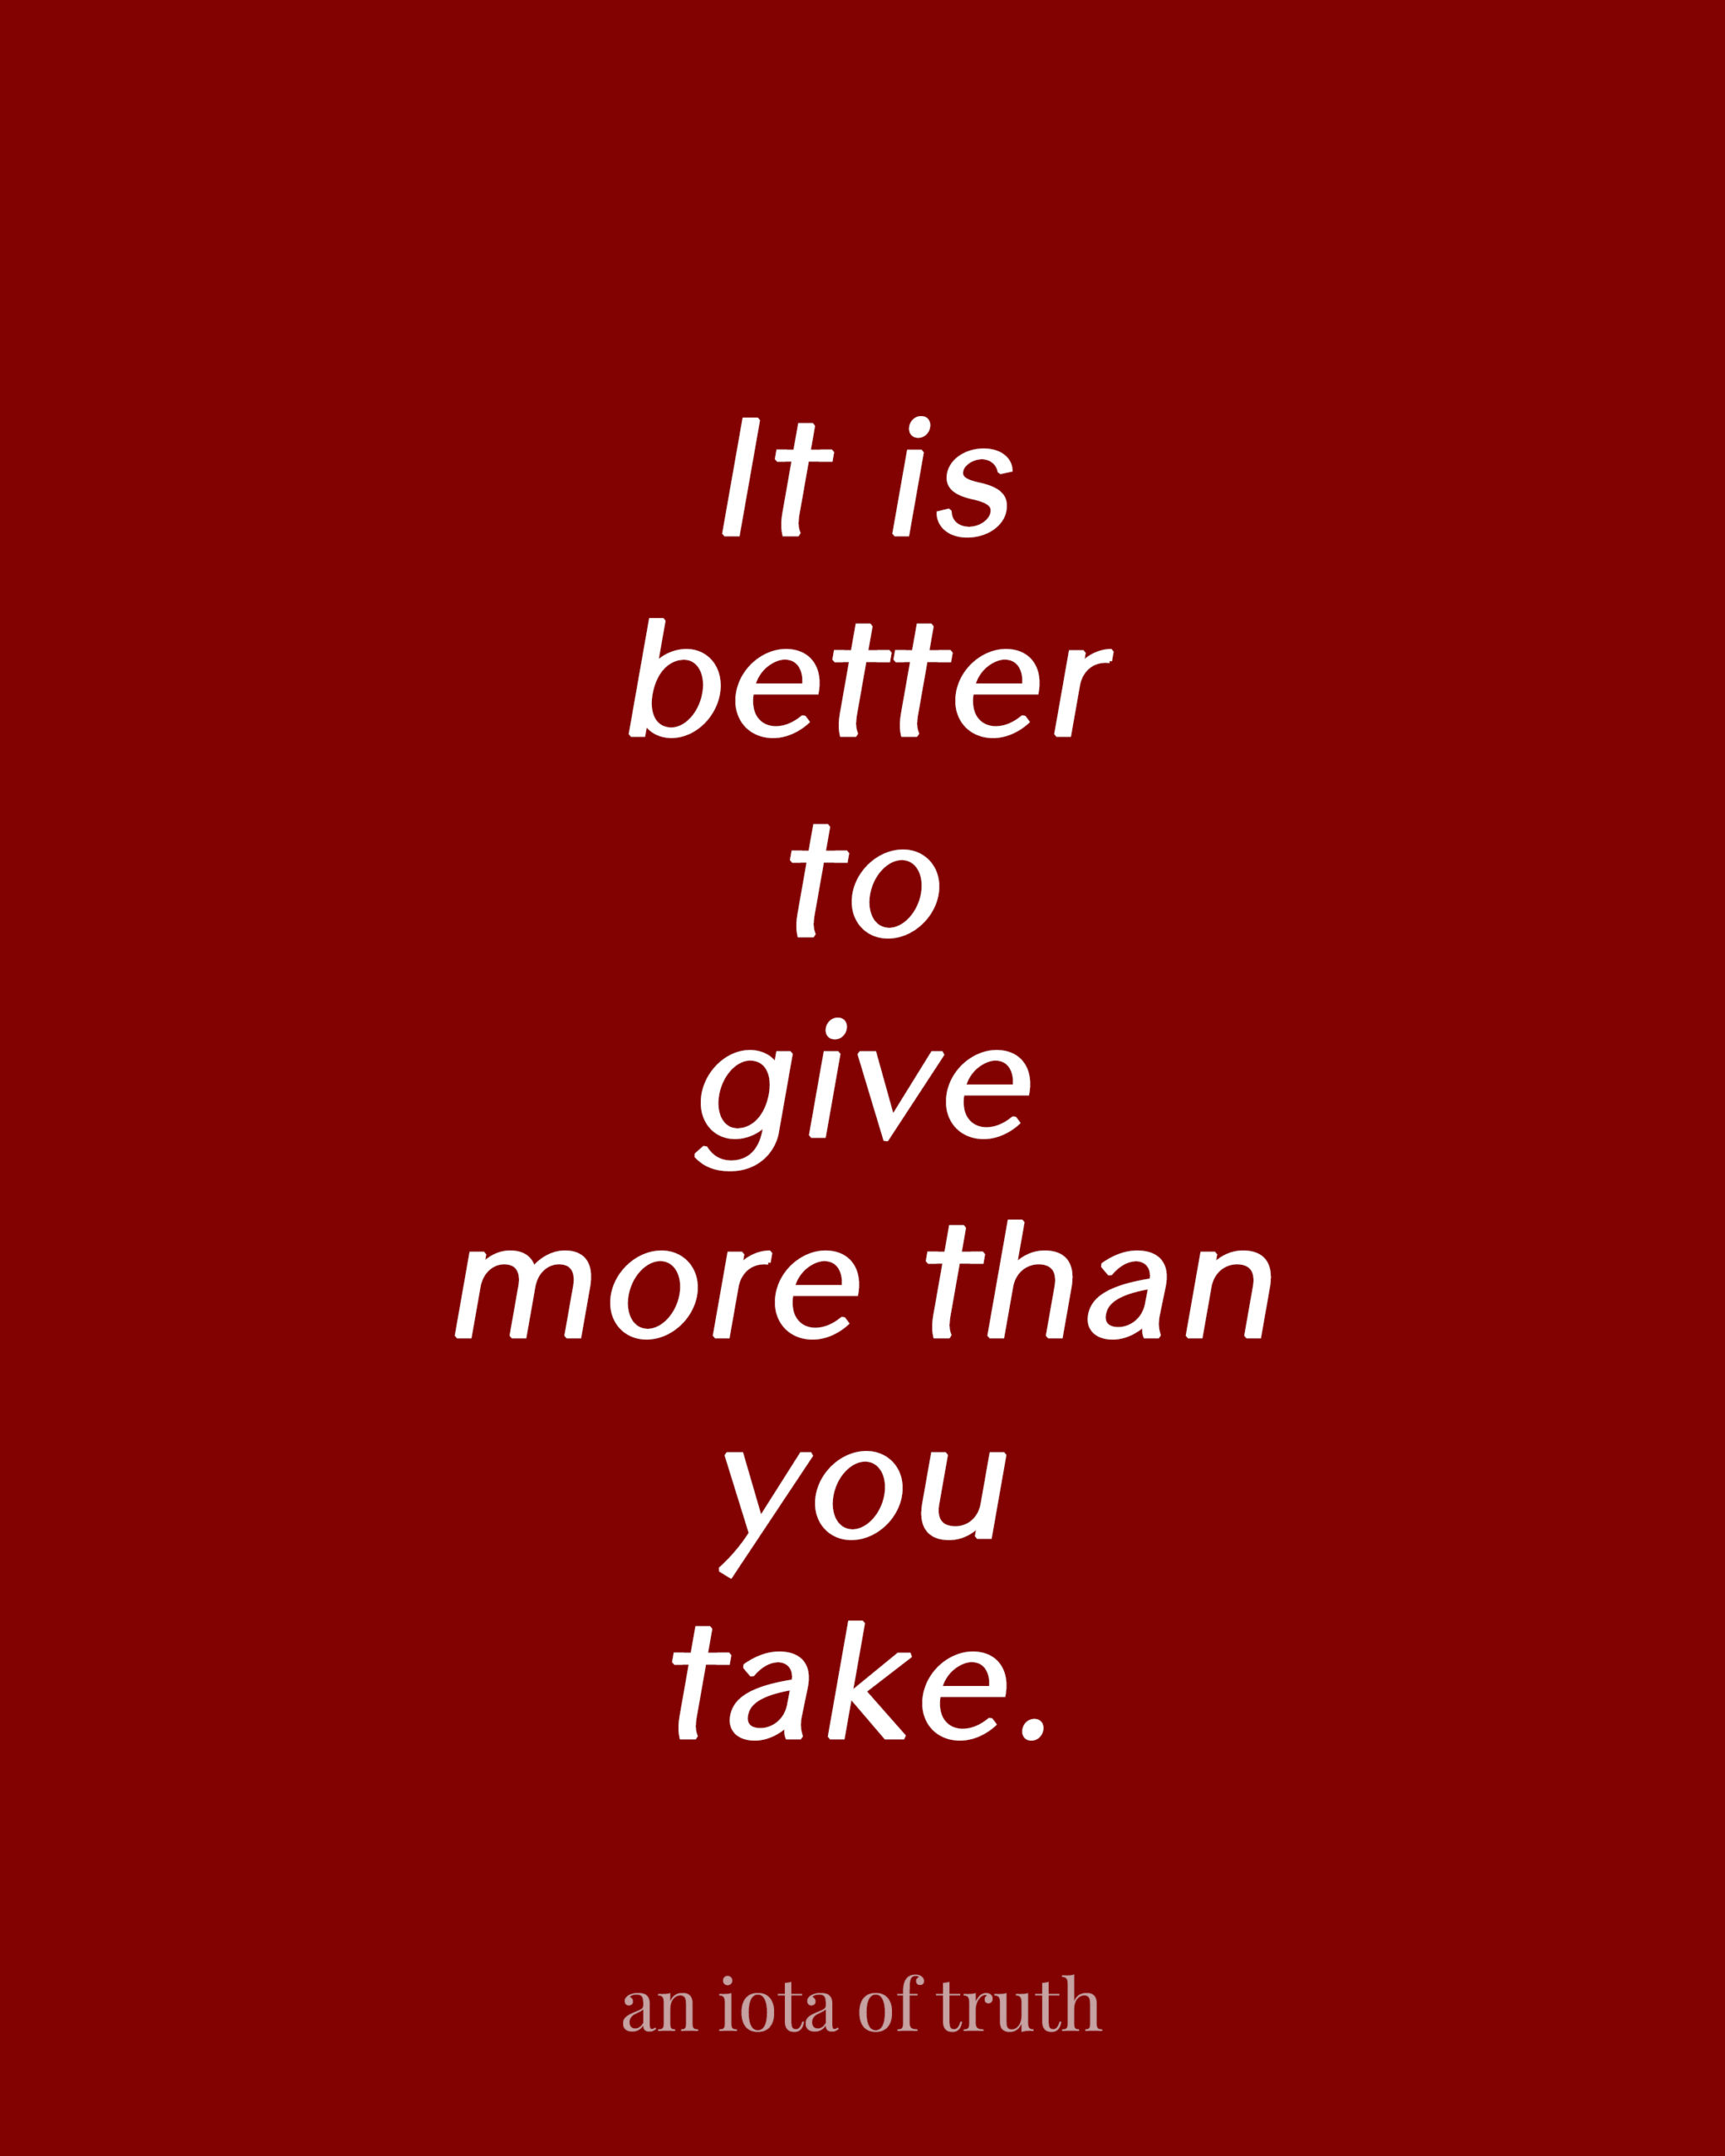 It is better to give more than you take.